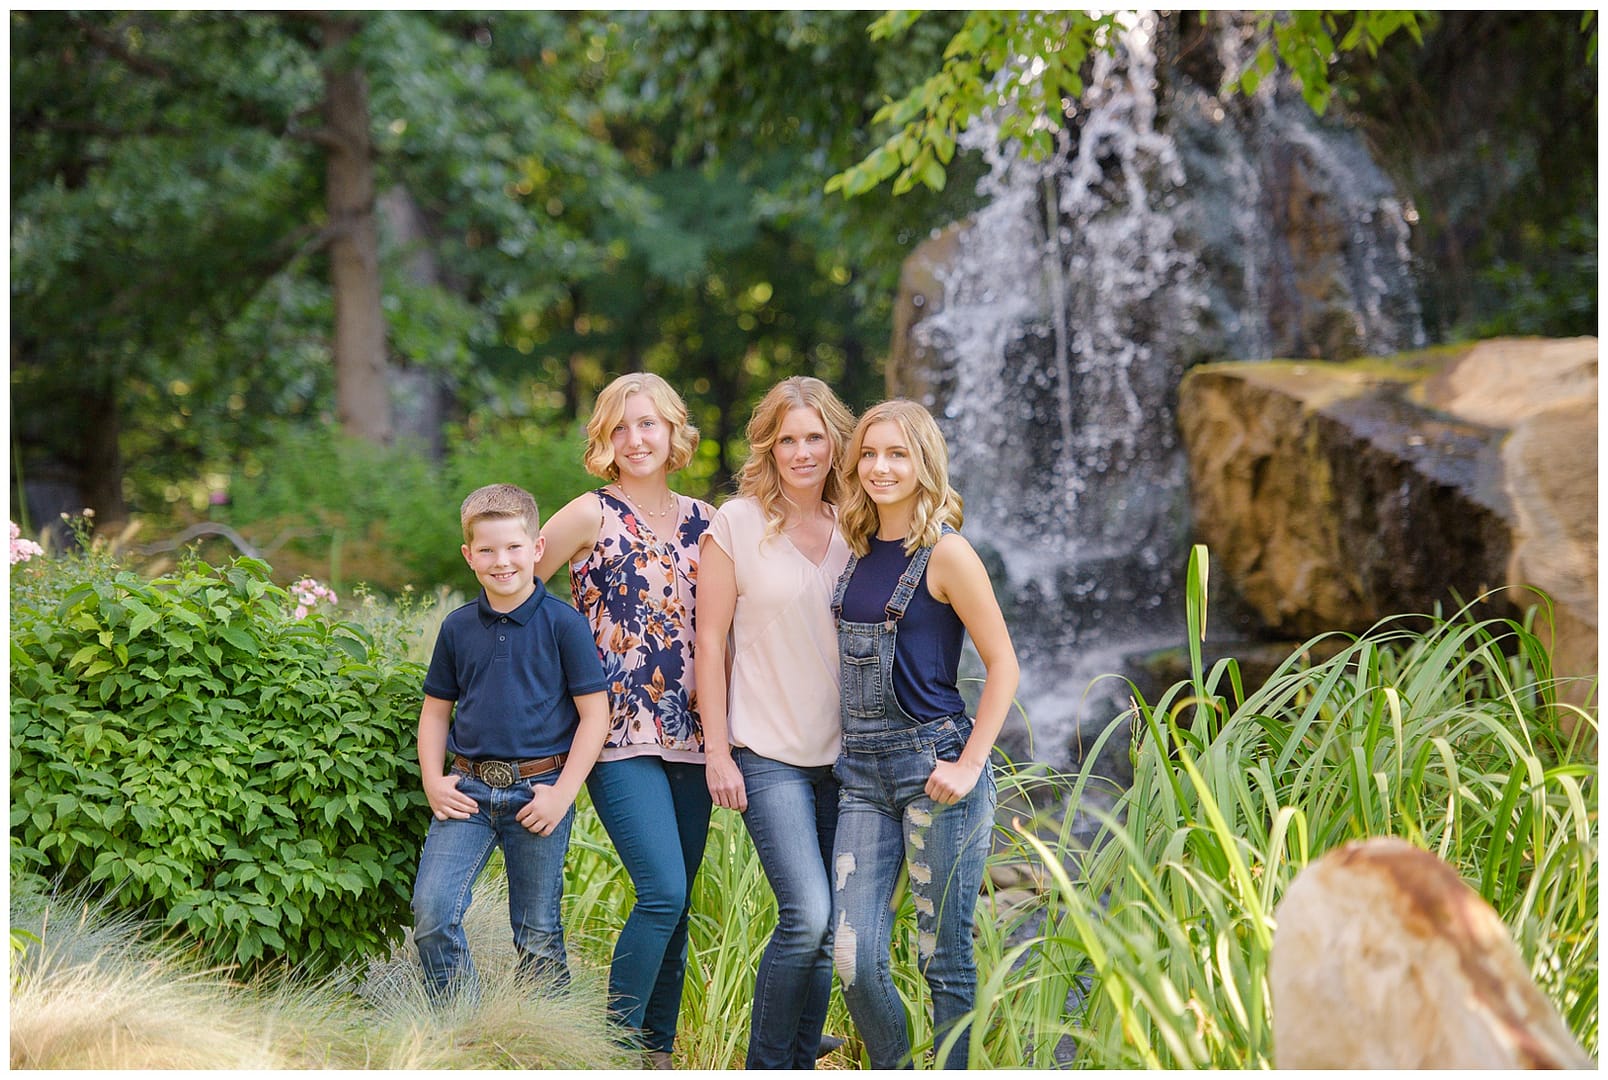 Boise family stands in front of waterfall. Photos by Tiffany Hix Photography.